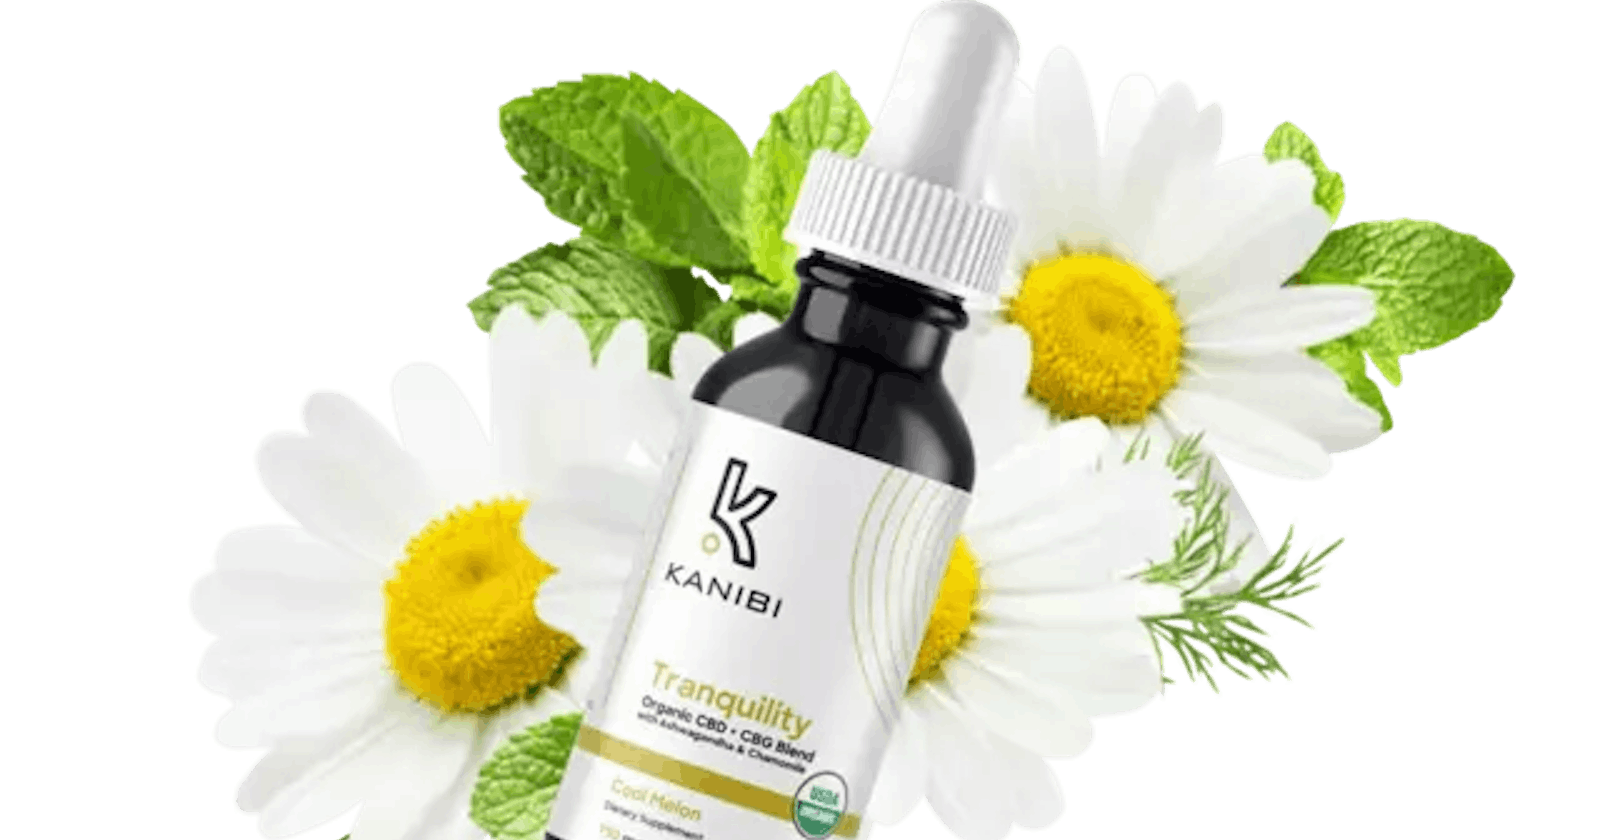 Embrace a Tranquil Lifestyle with Kanibi Tranquility CBD: Conclusion